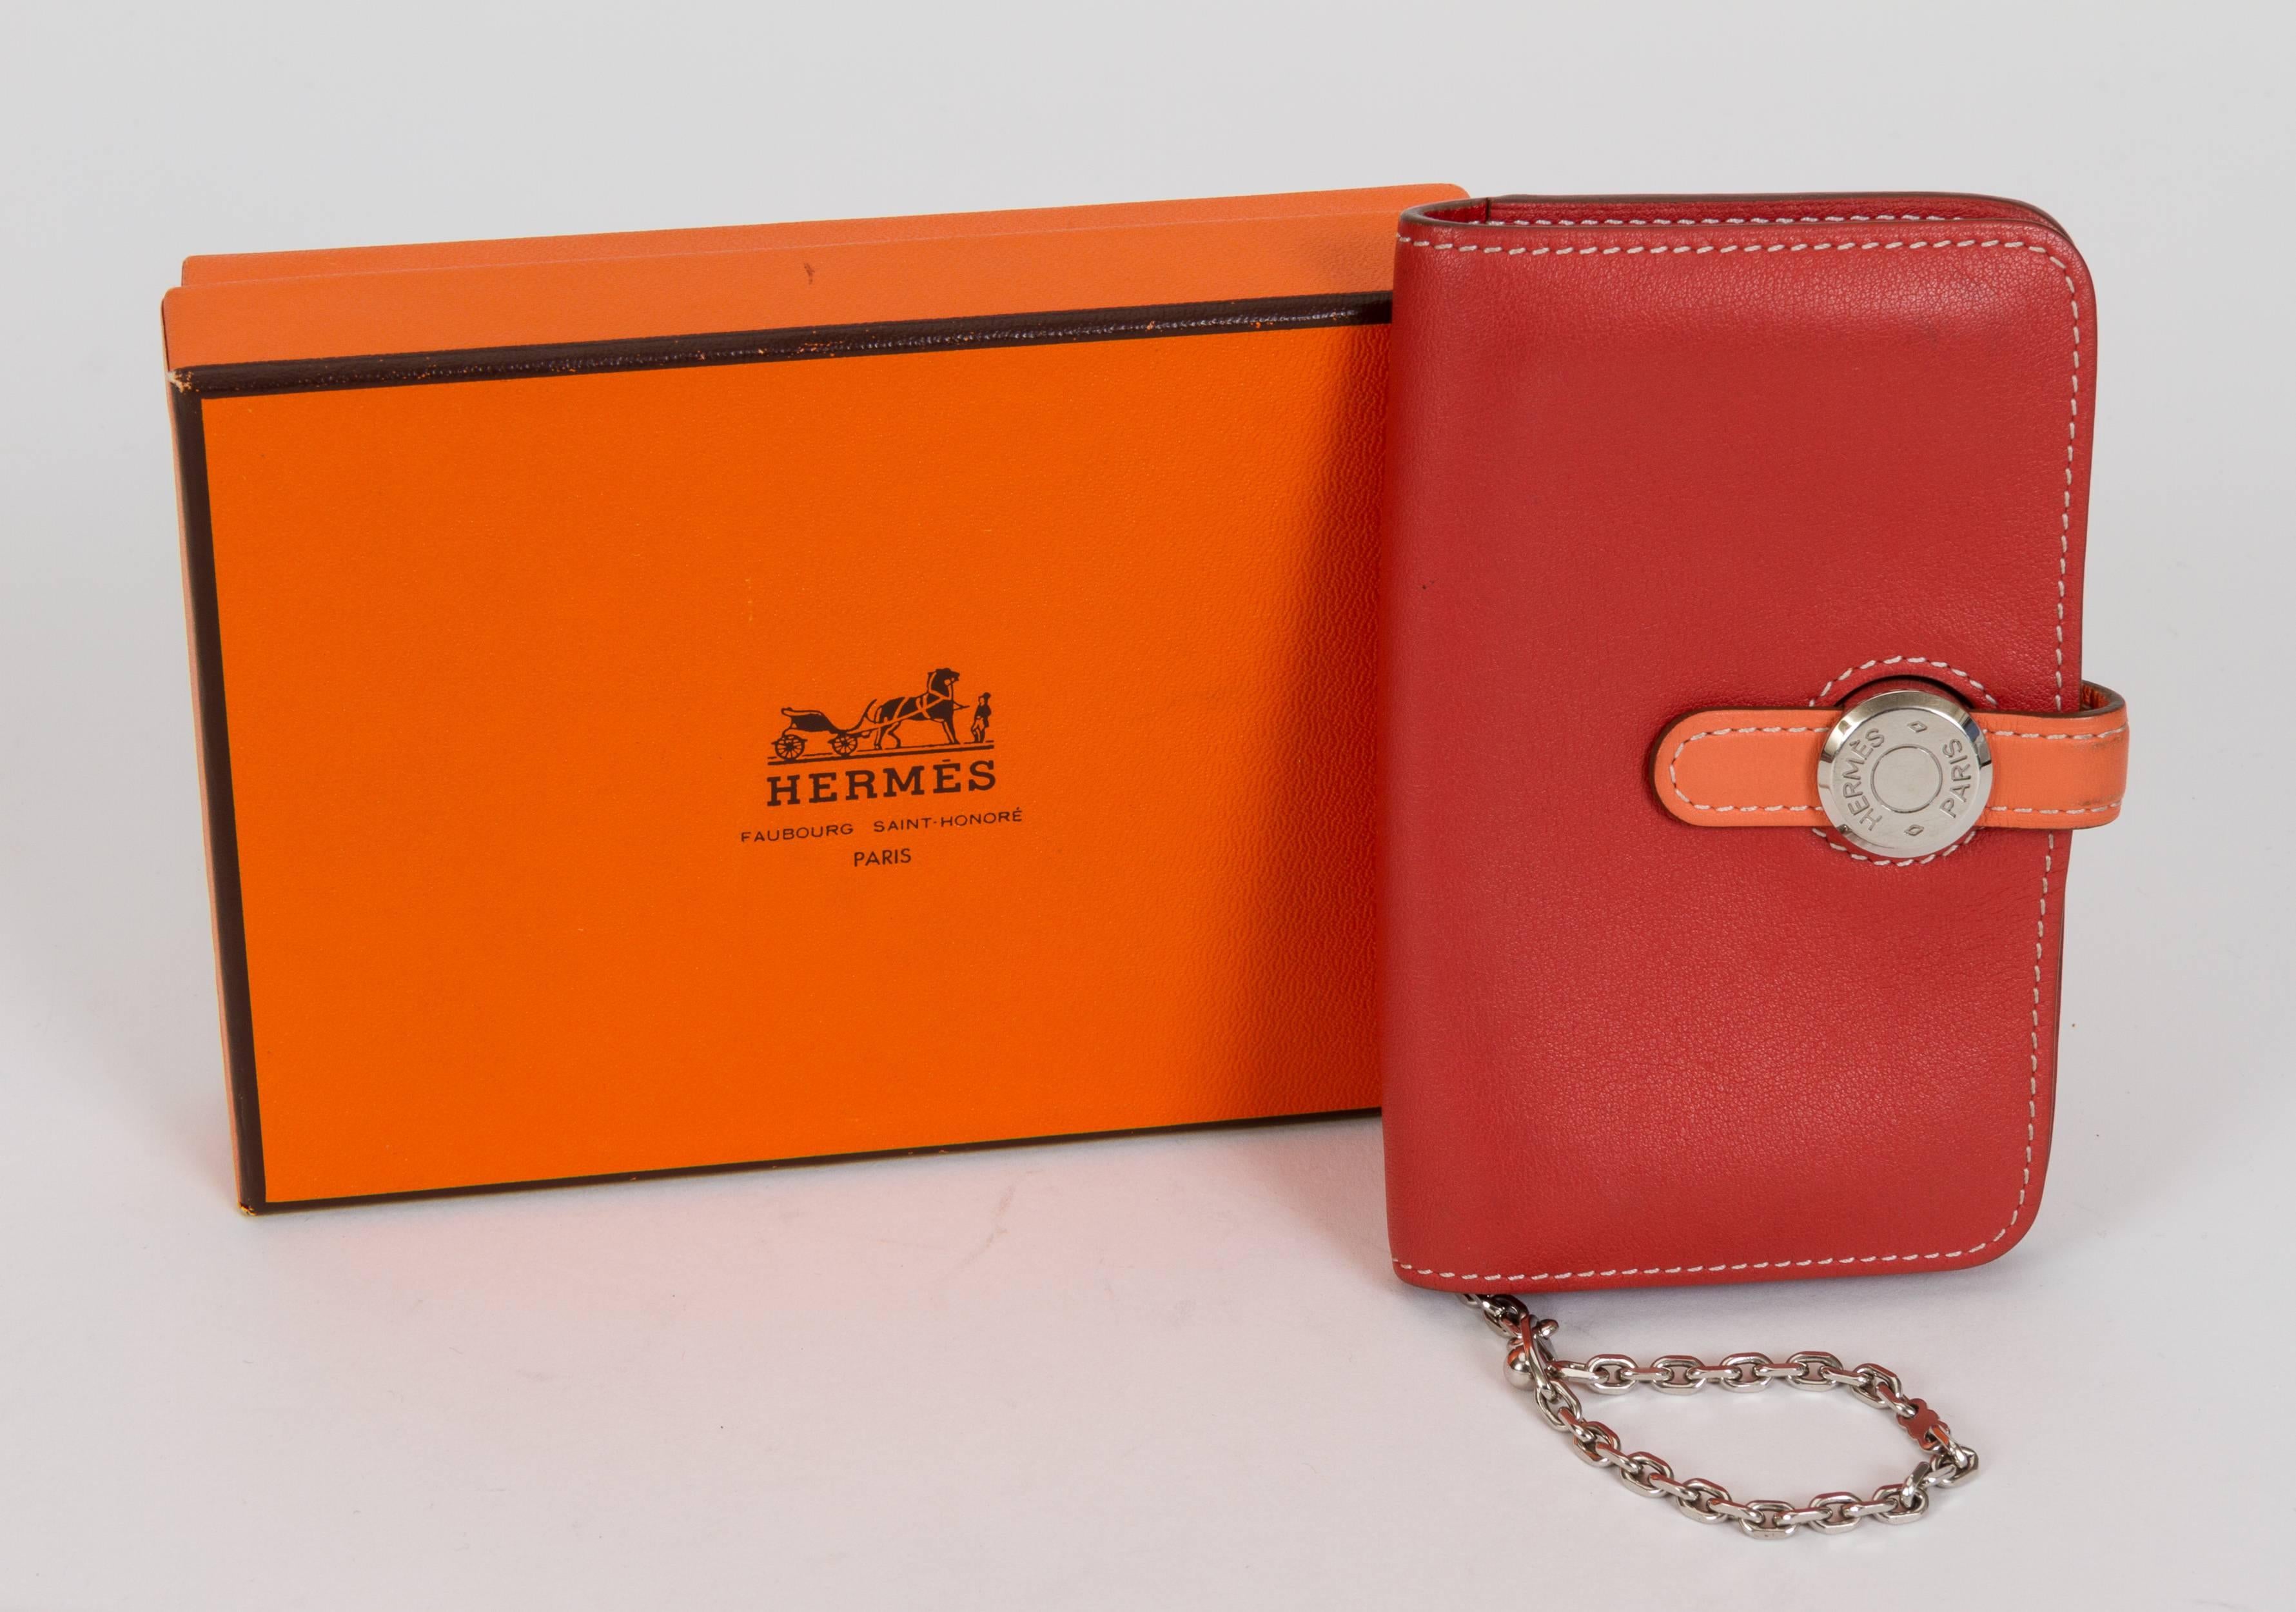 Hermès small dogon card wallet in bicolor swift leather and palladium hardware. Brick and coral combination. Date stamp Q for 2013. Comes with original box.
